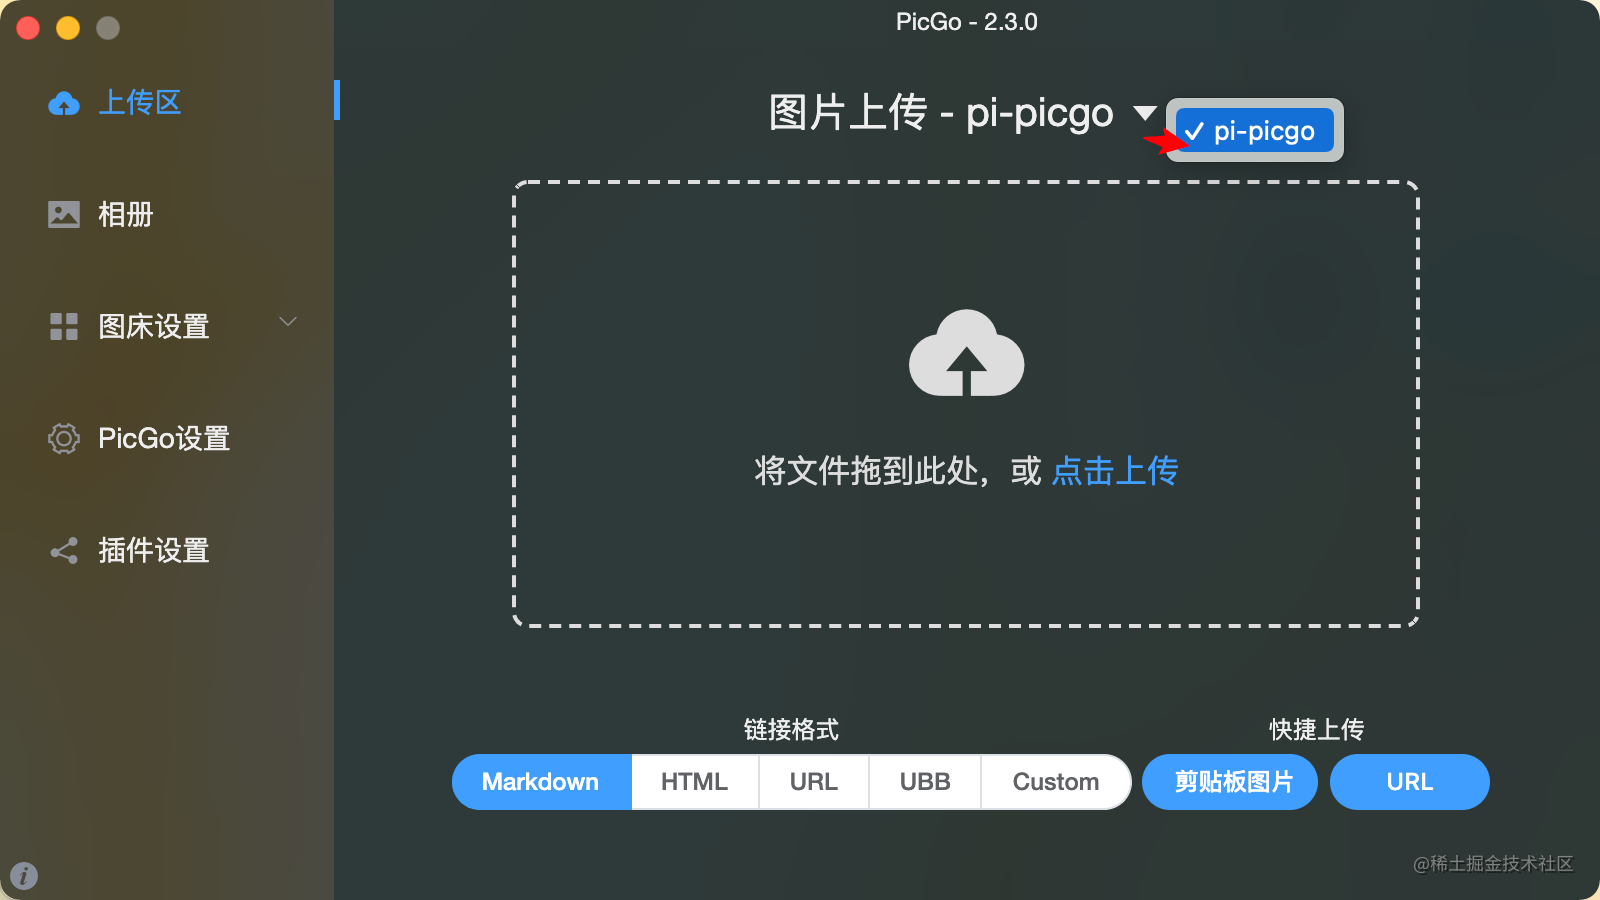 Select the default image bed as pi-picgo